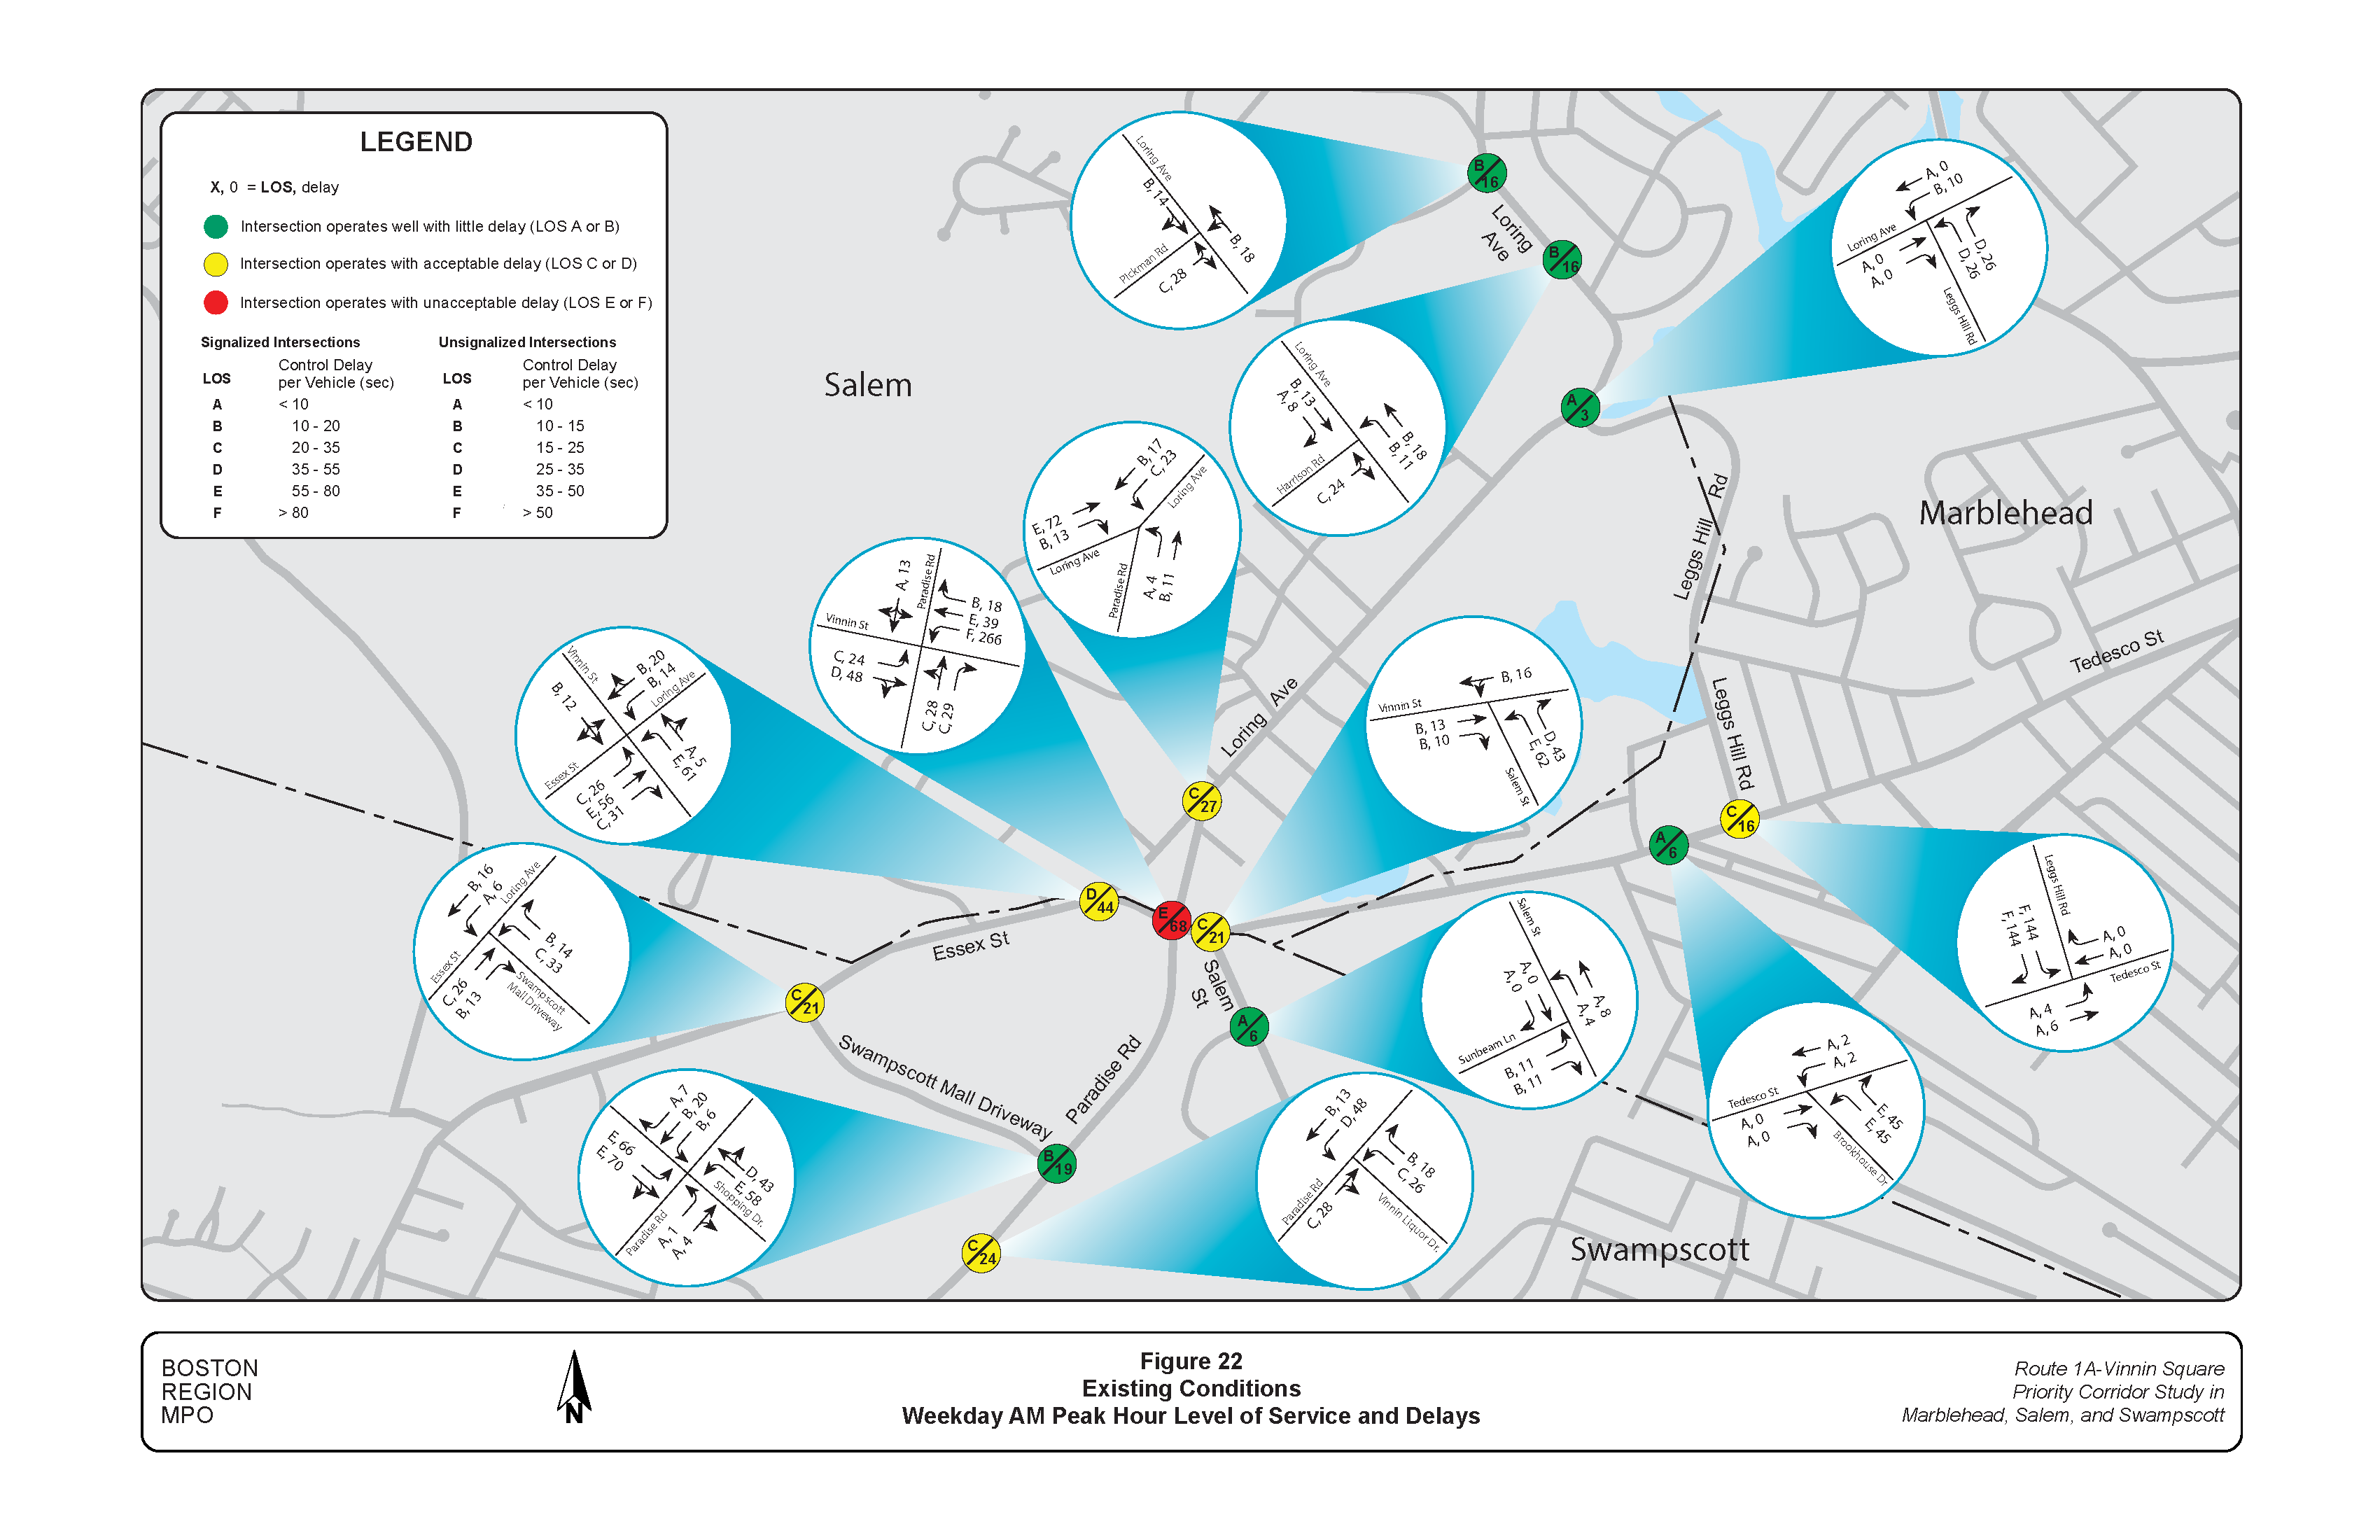 FIGURE 22. Existing Conditions: Weekday AM Peak Hour Level of Service and Delays.Figure 22 is a map of the study area with graphics embedded showing the existing level of service and delays at intersections during the weekday AM peak hour travel time.